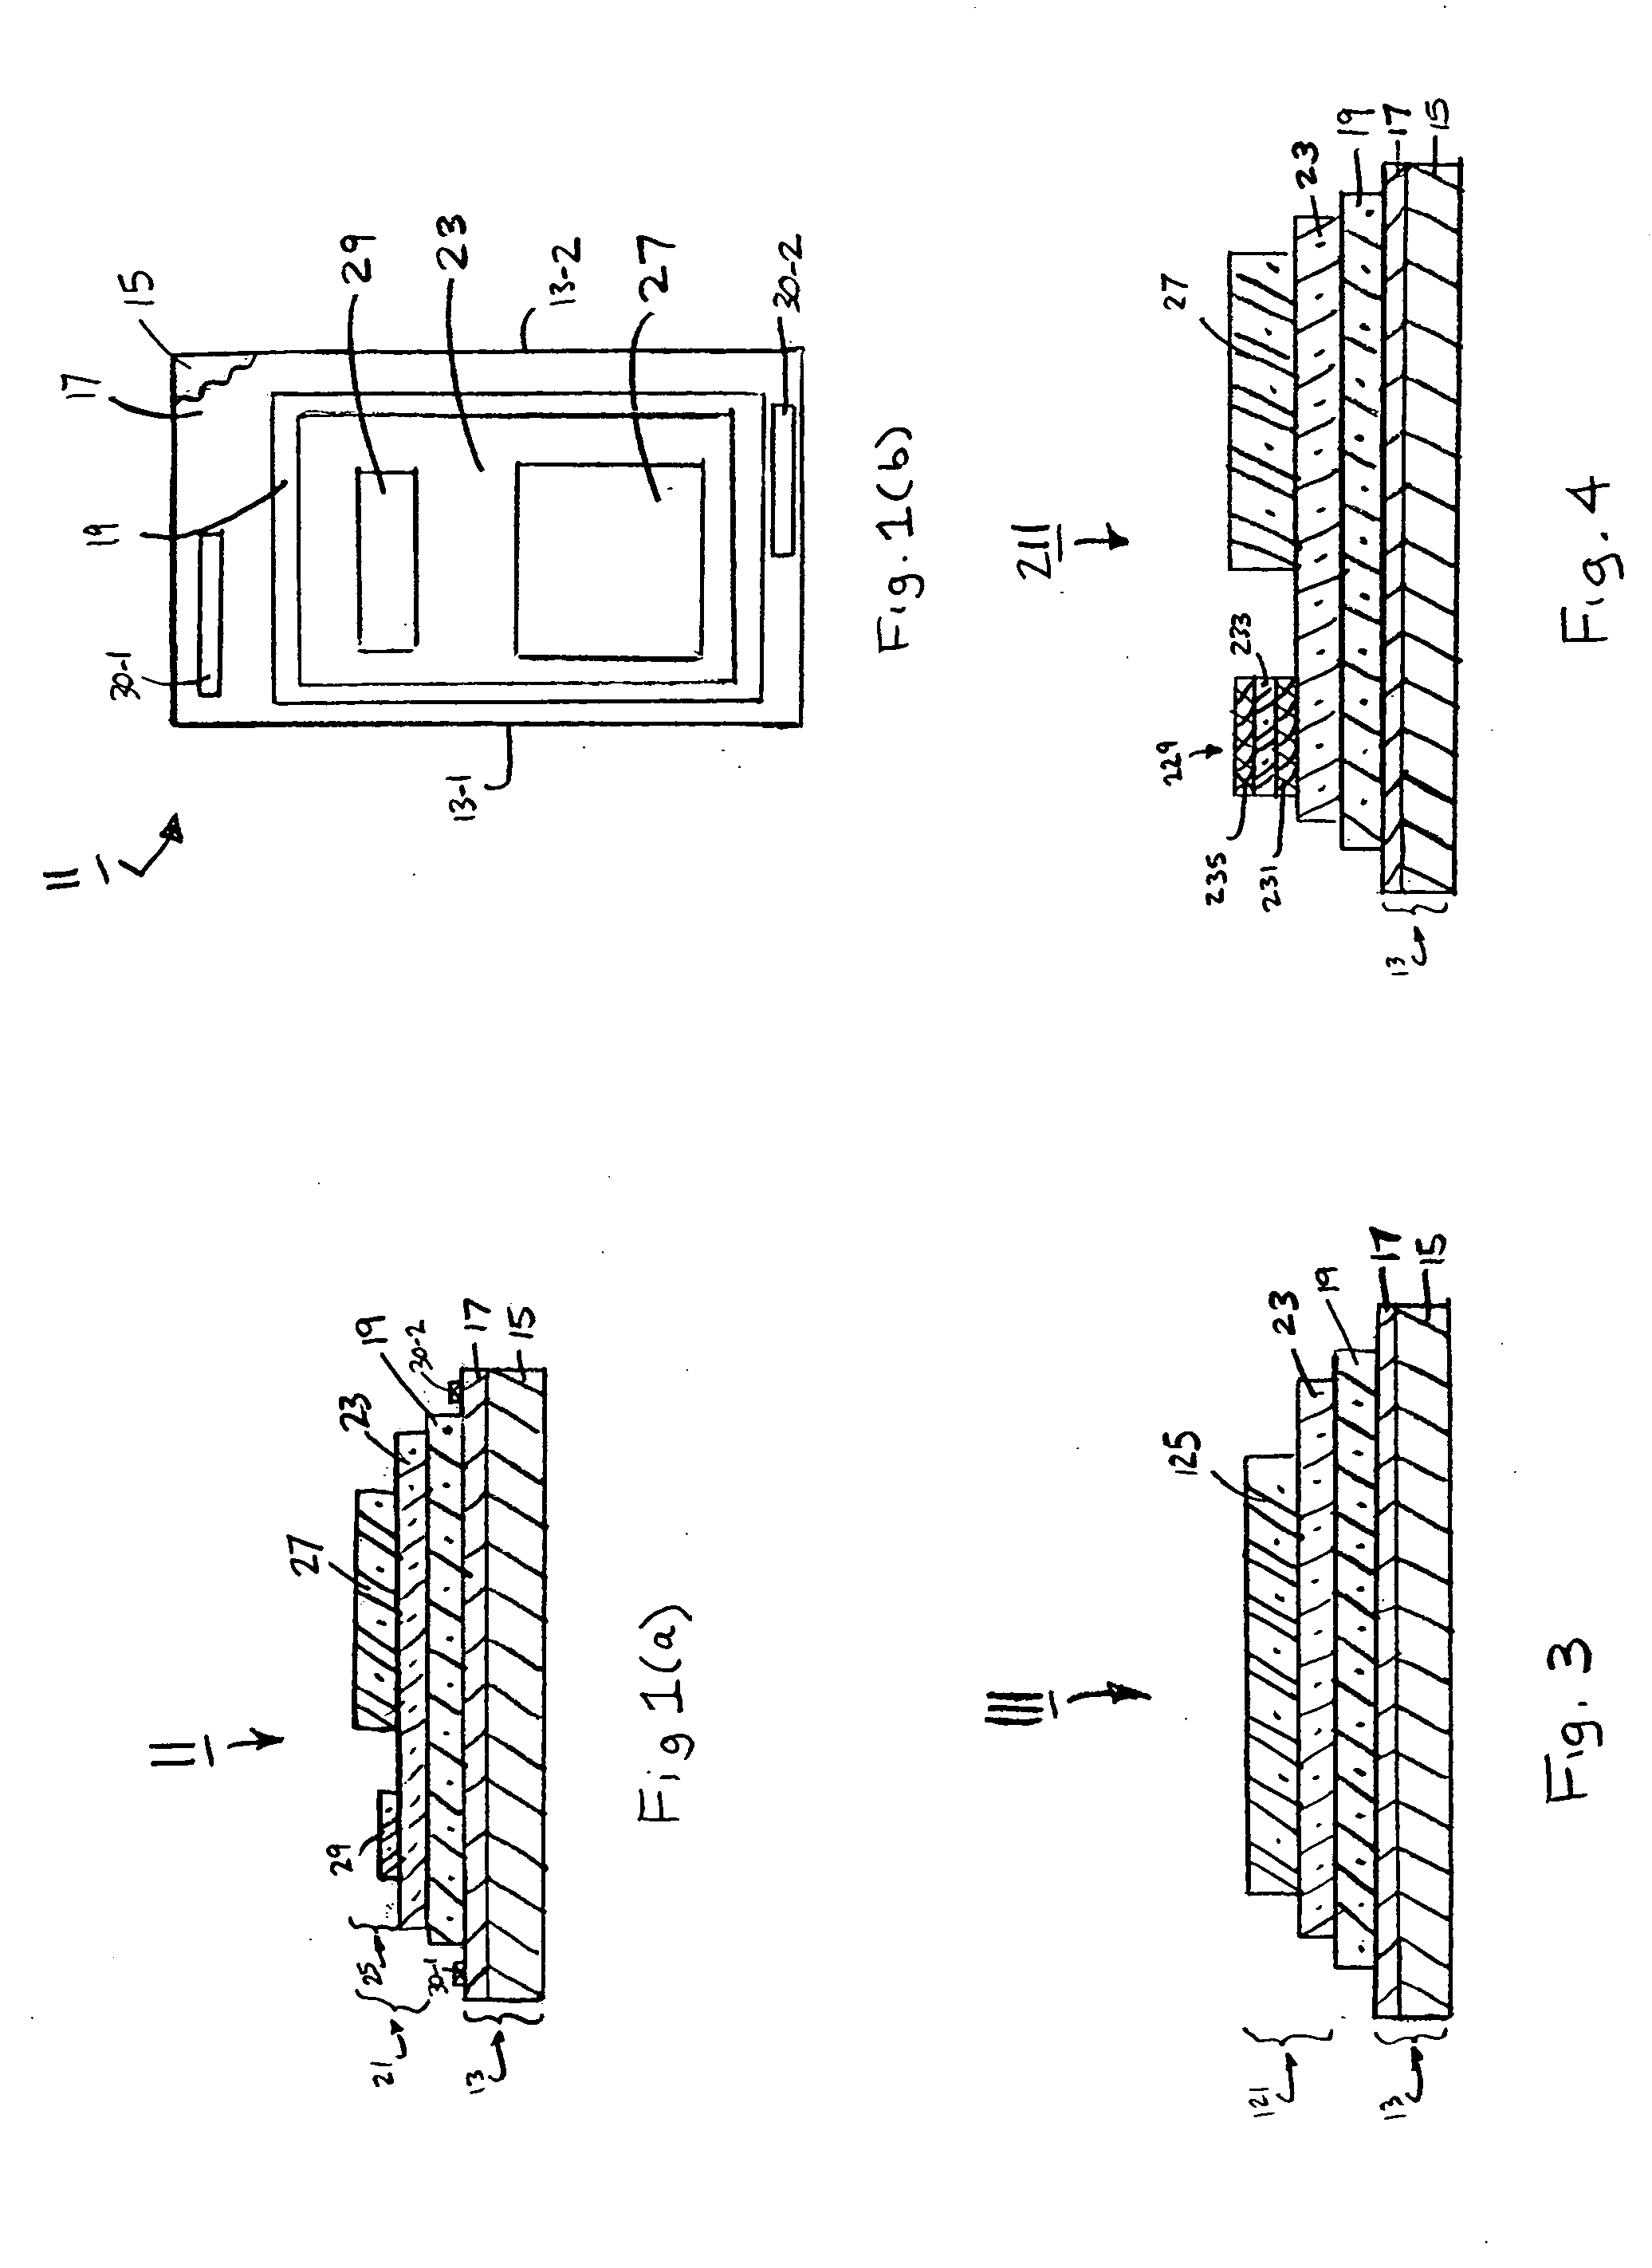 Heat-transfer label well-suited for labeling fabrics and methods of making and using the same